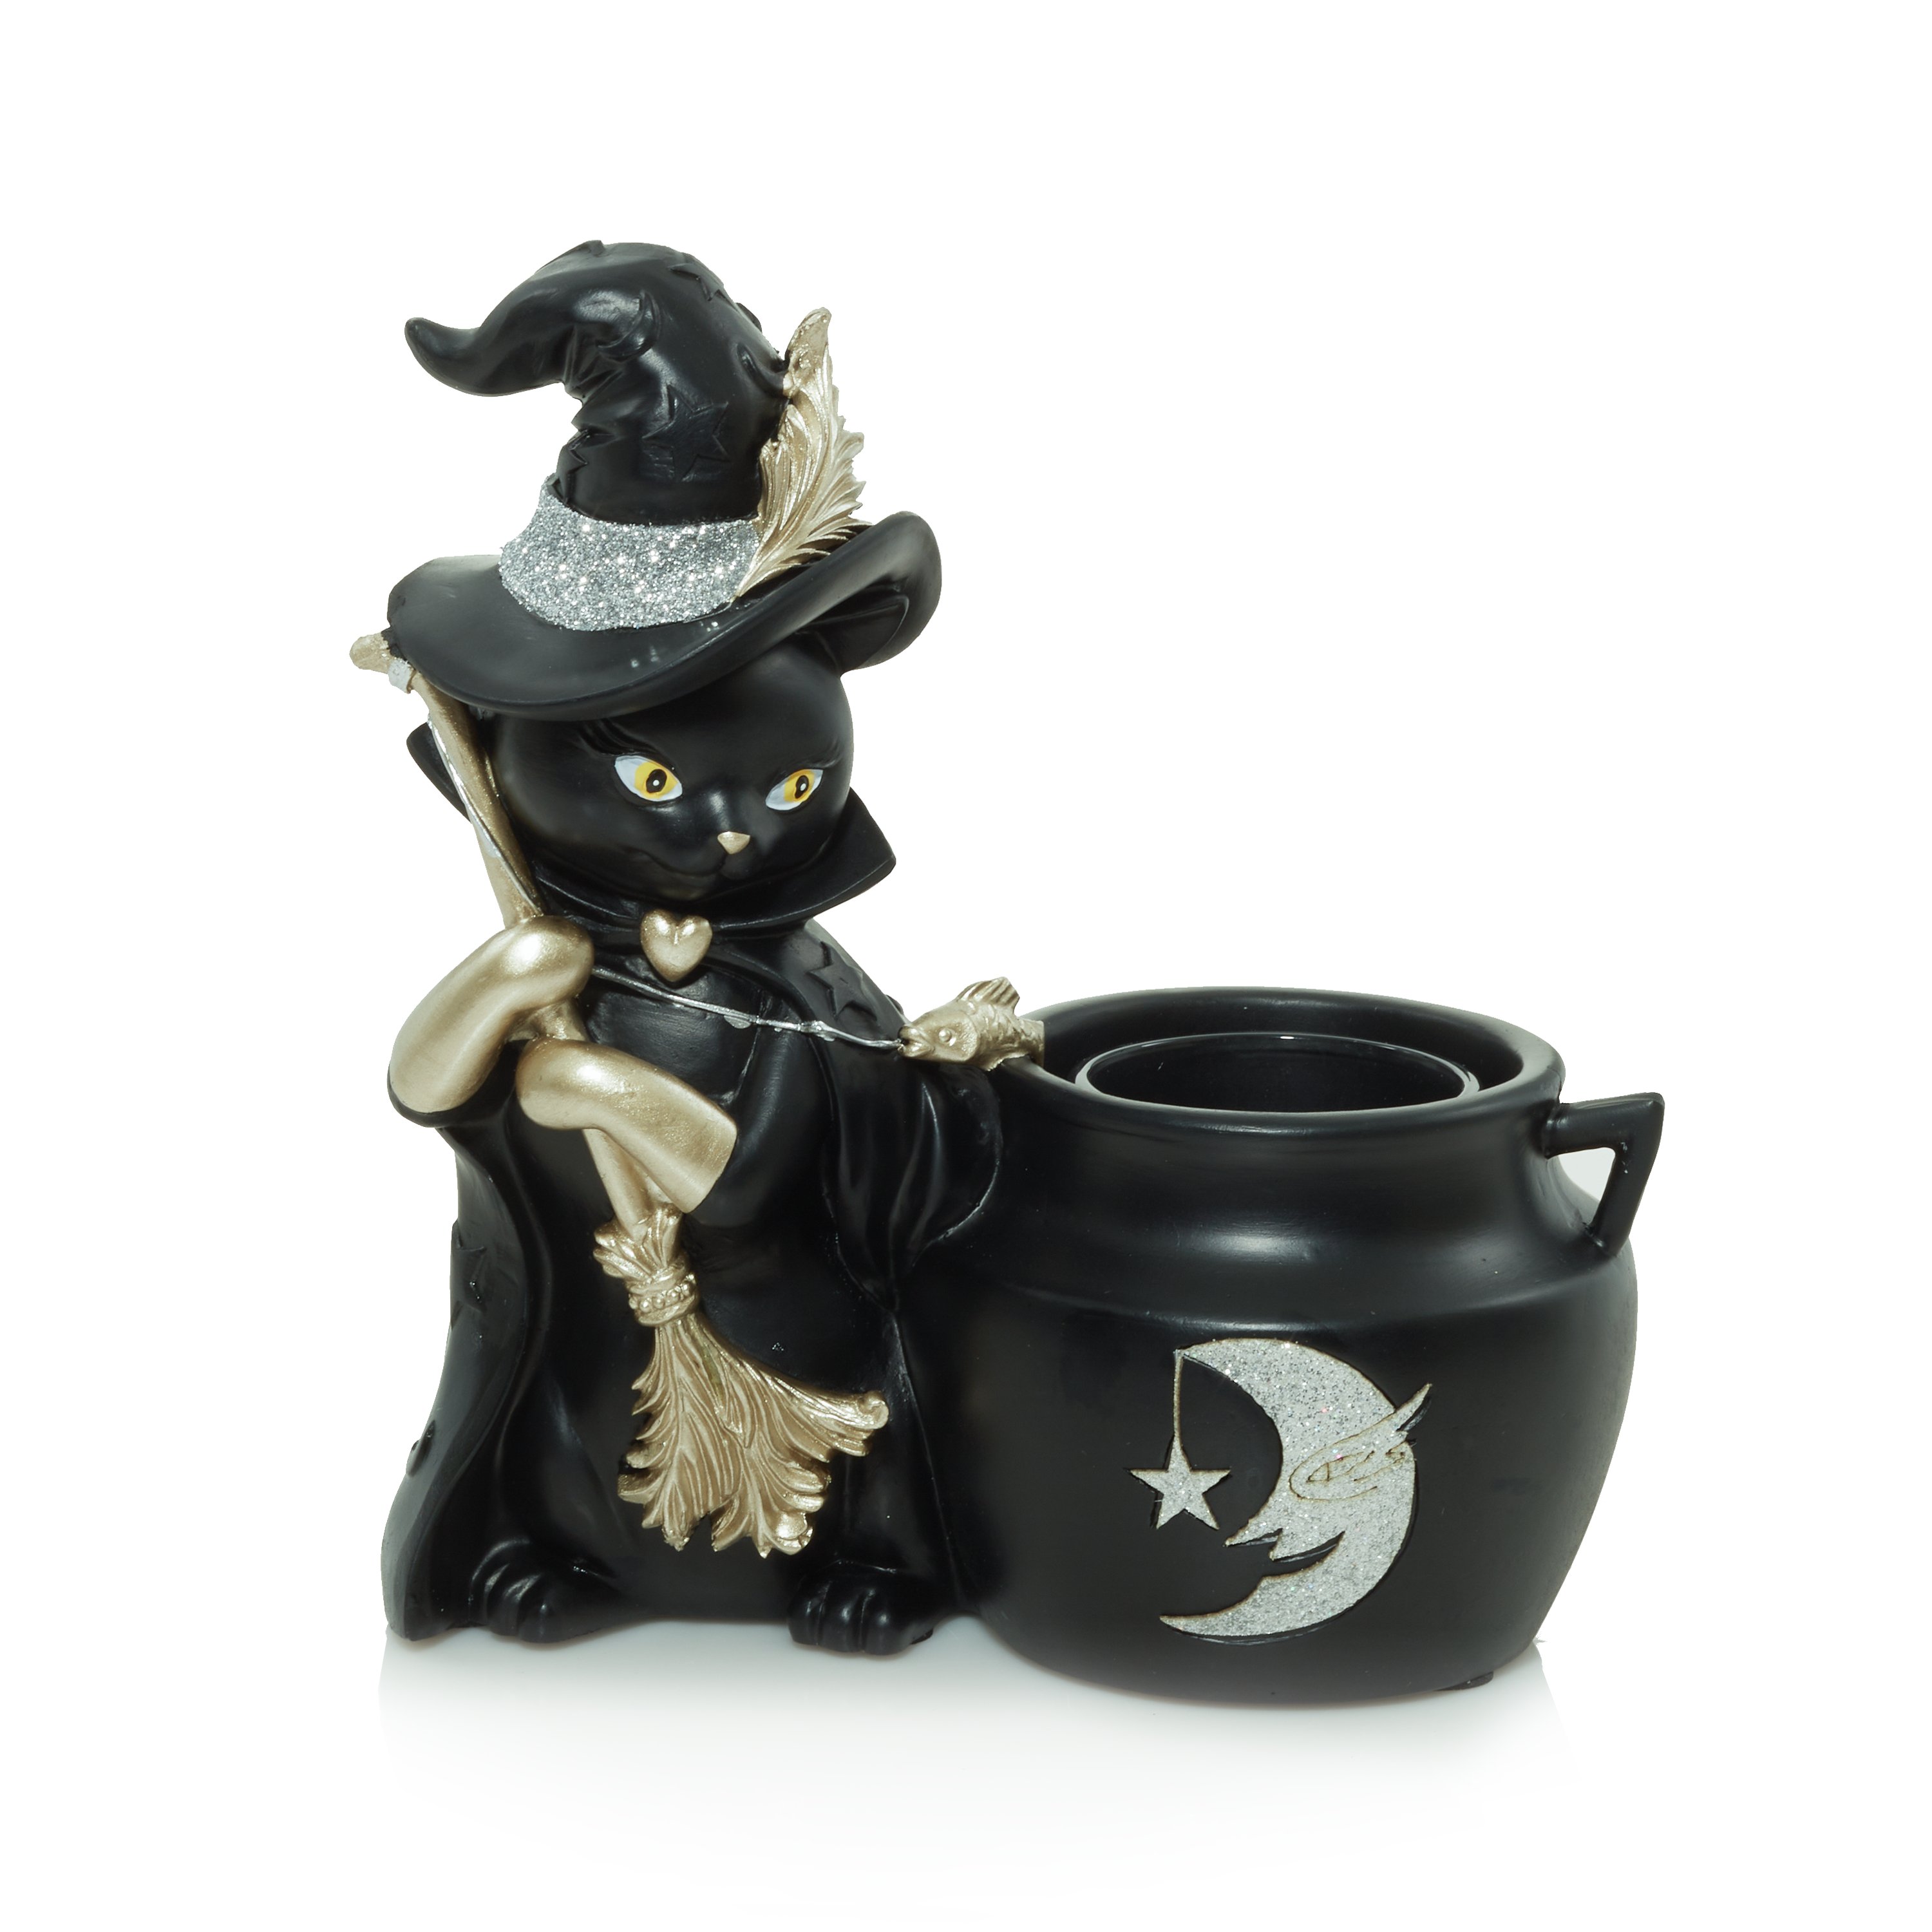 YANKEE CANDLE MIDNIGHT SOPHIA THE CAT VOTIVE CANDLE HOLDER HALLOWEEN RETIRED HTF 